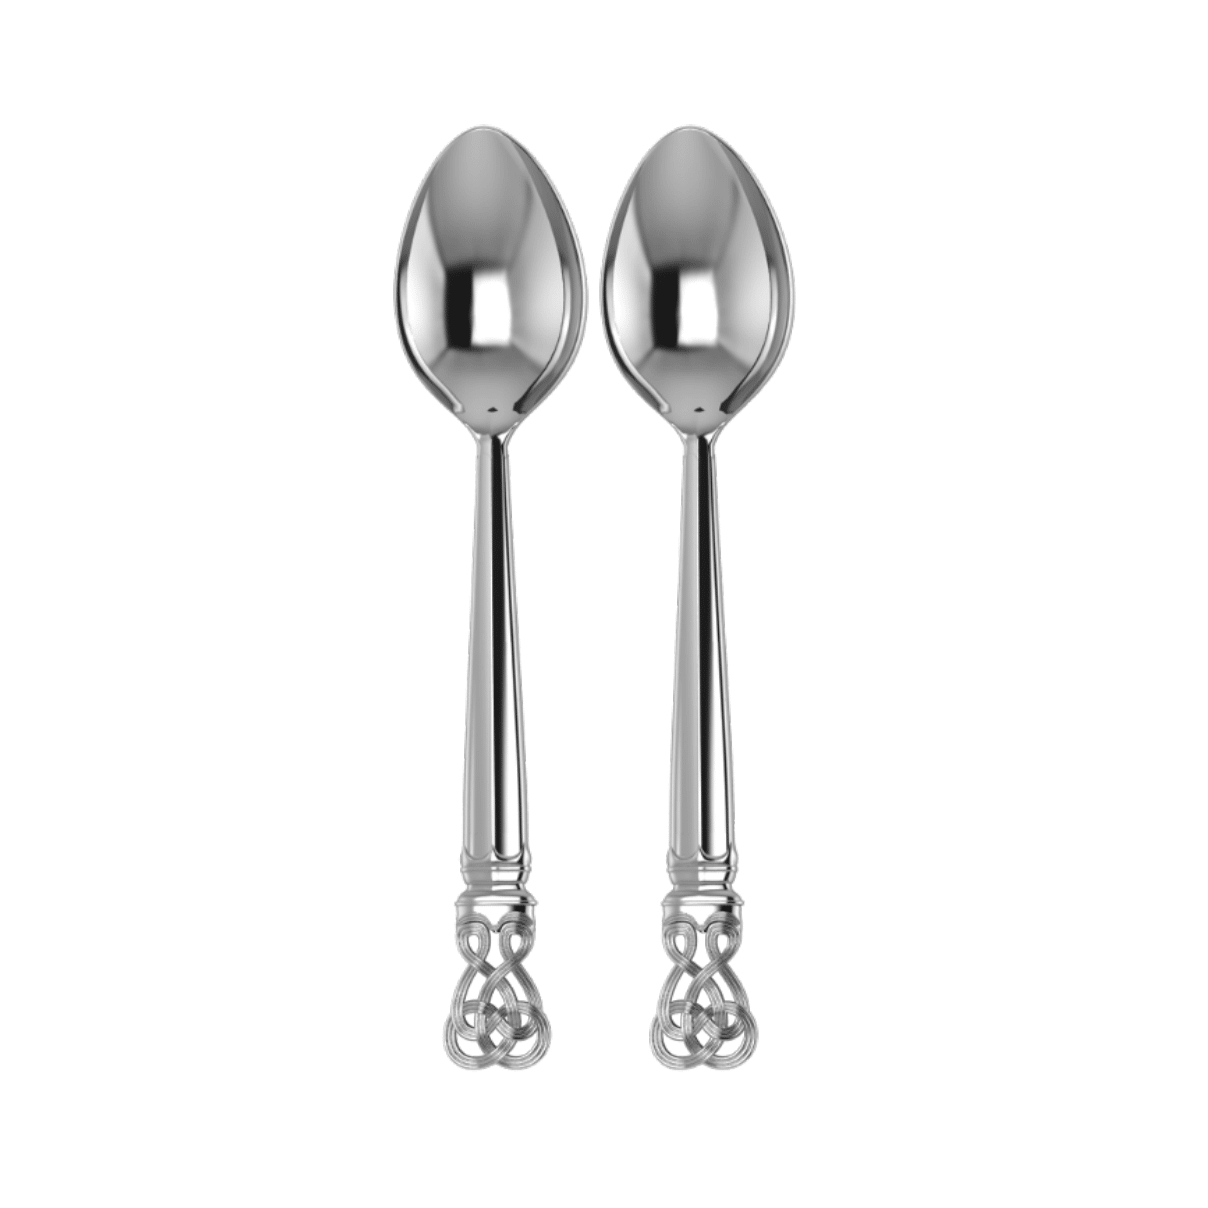 Sterling Silver Tea Spoon Set - The Le Noue Collection